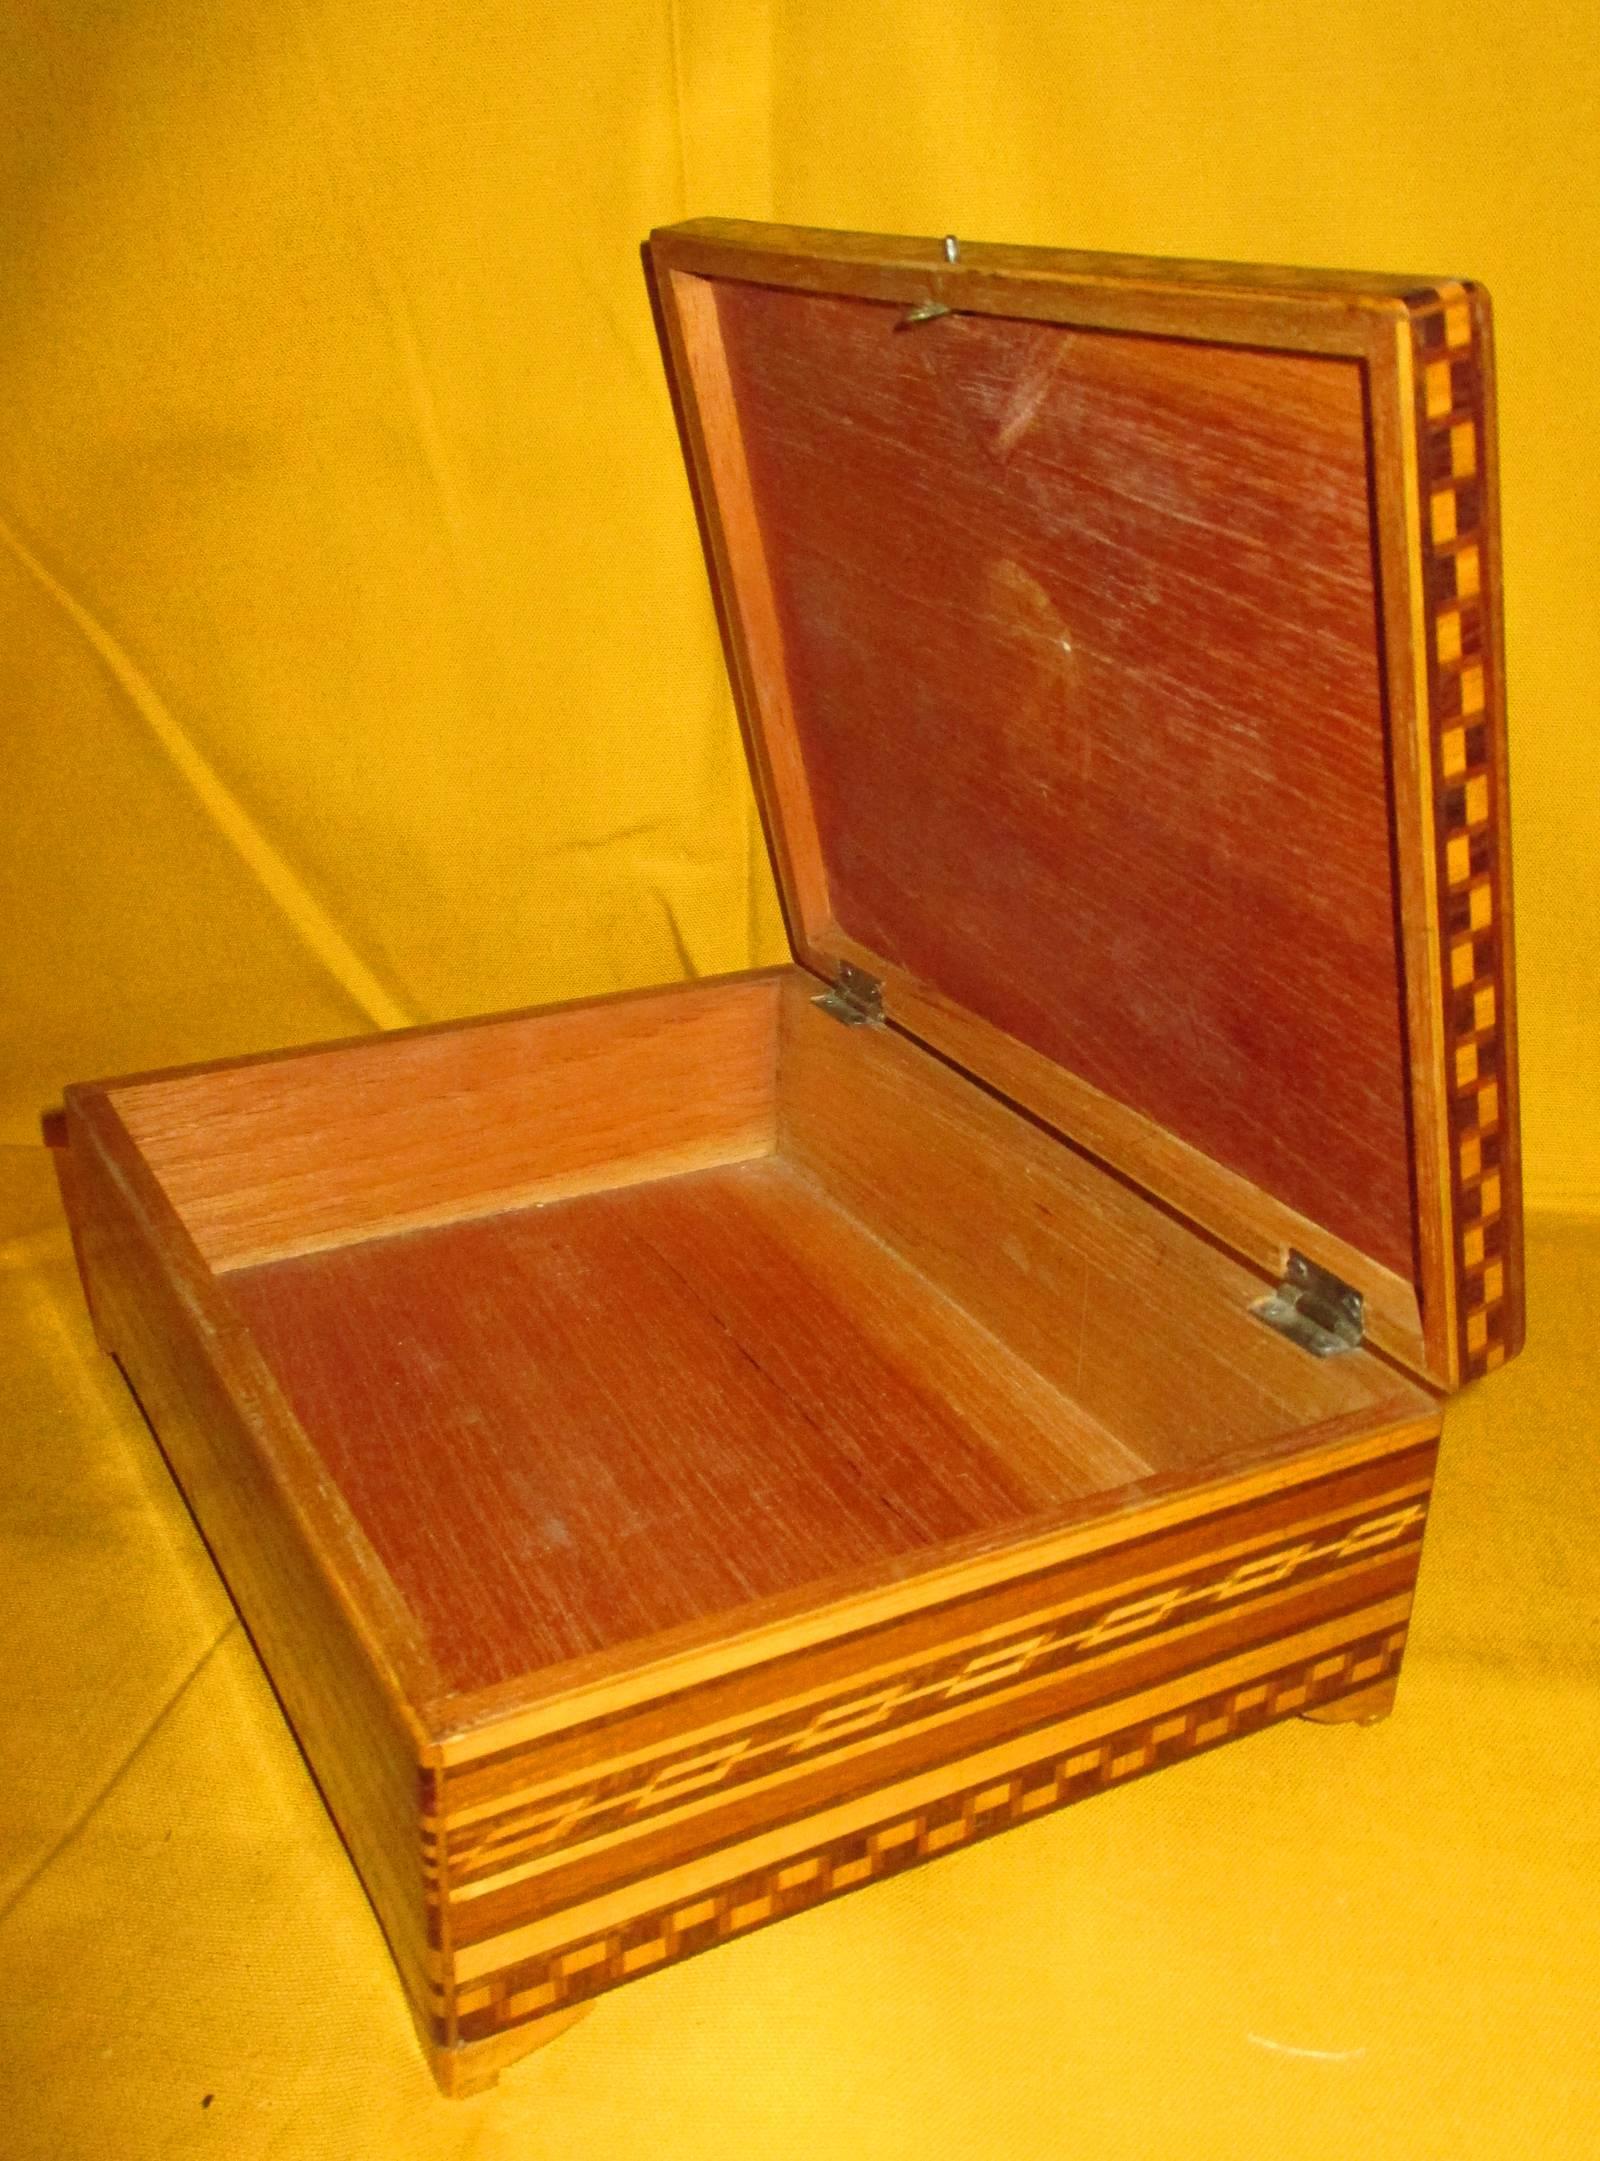 The most famous town in Mexico for rebozo making, also has a history of making some beautiful inlaid wooden boxes. These were made specifically to store the rebozos. No other area made these designs in marquetry. A woman of culture and class might